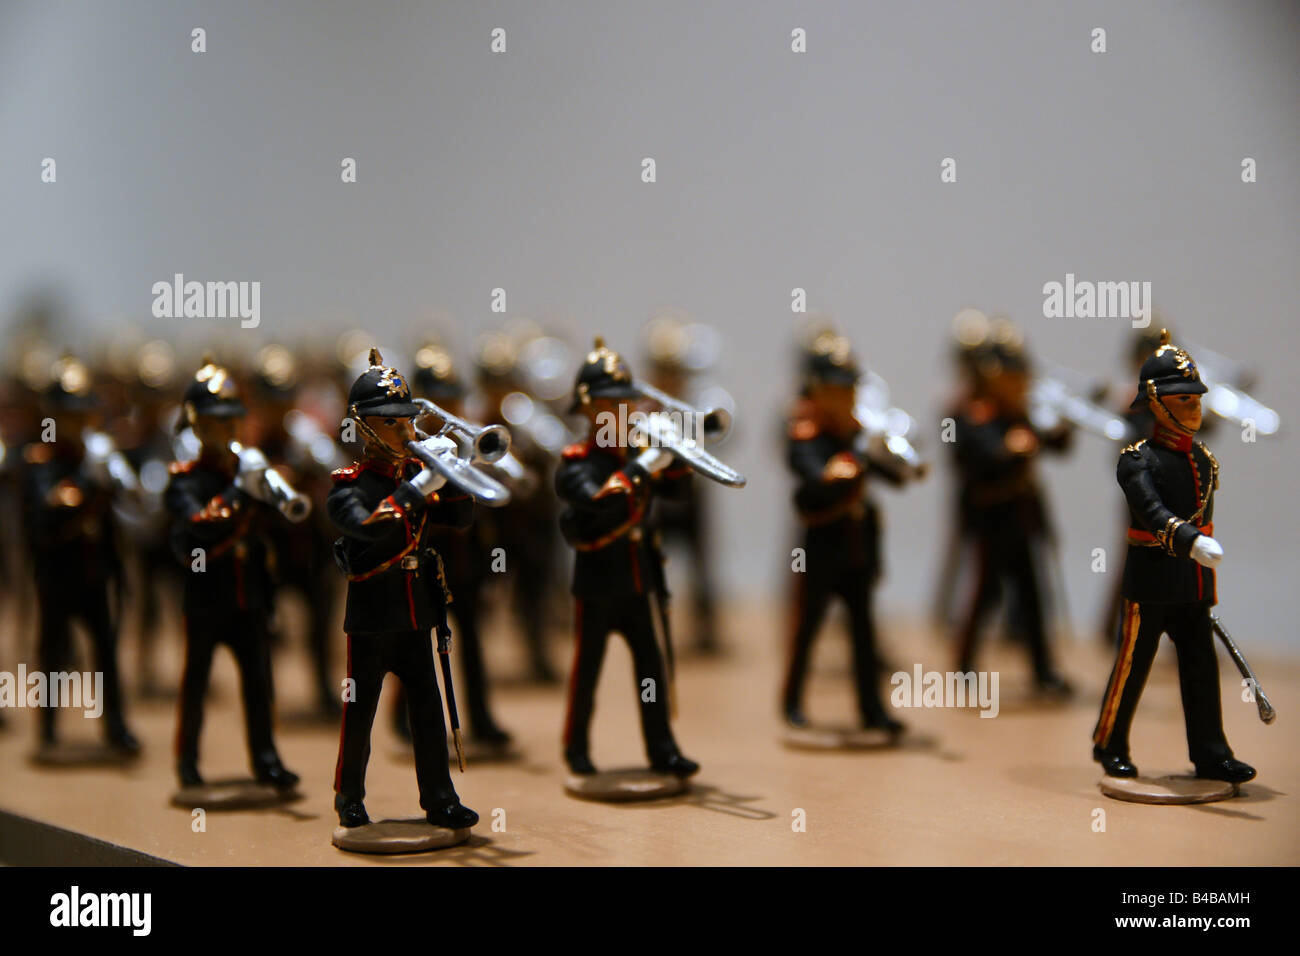 Tin pewter soldiers marching historic costumes figure statue sculpture toy in line old Dutch uniform Stock Photo